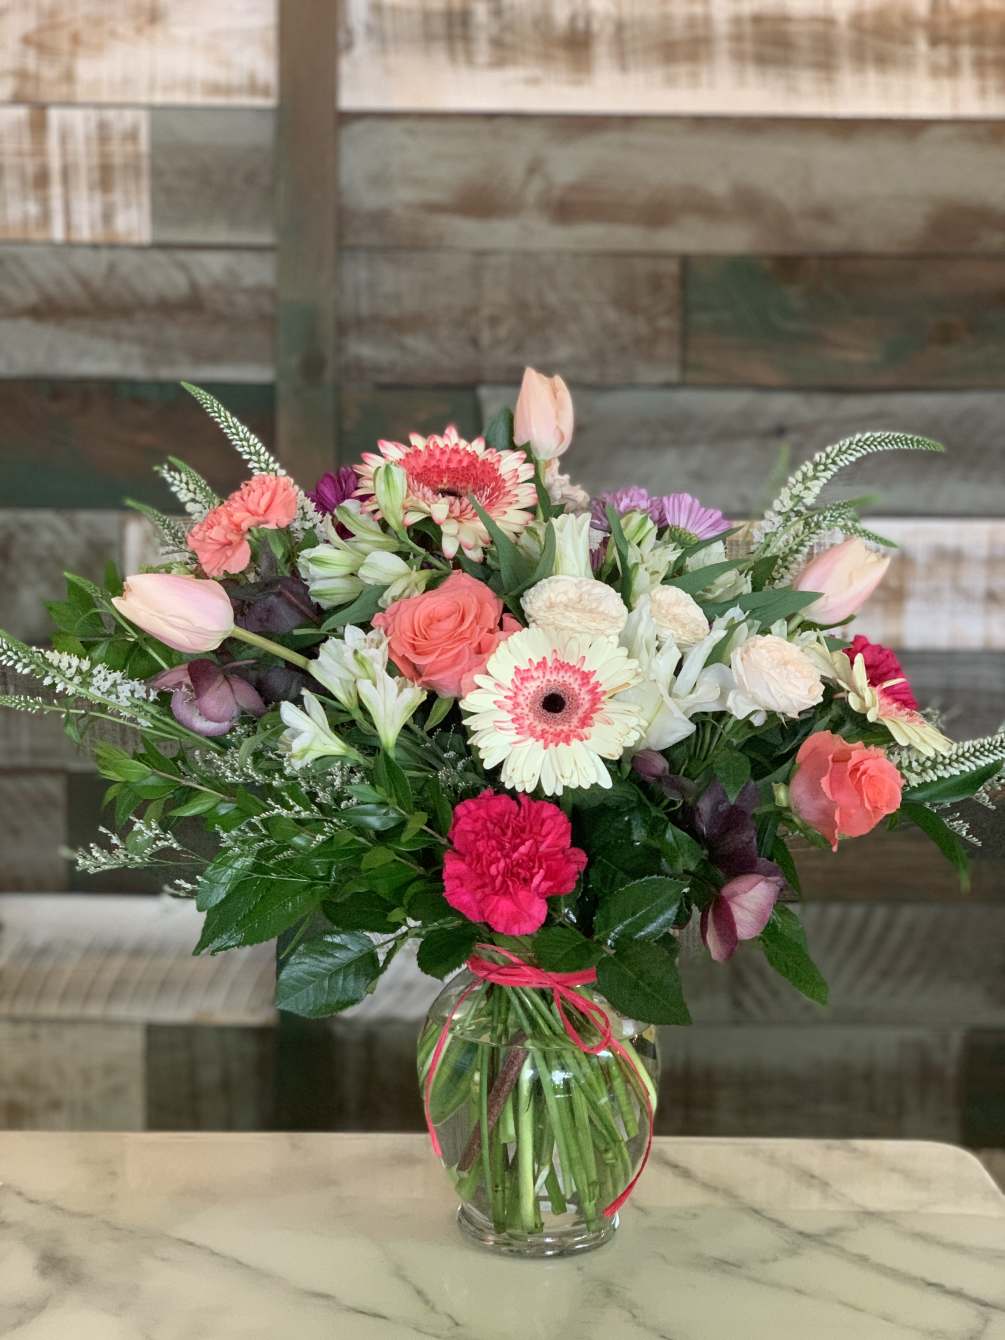 A real stunner with over 35 stems of California flowers including seasonal